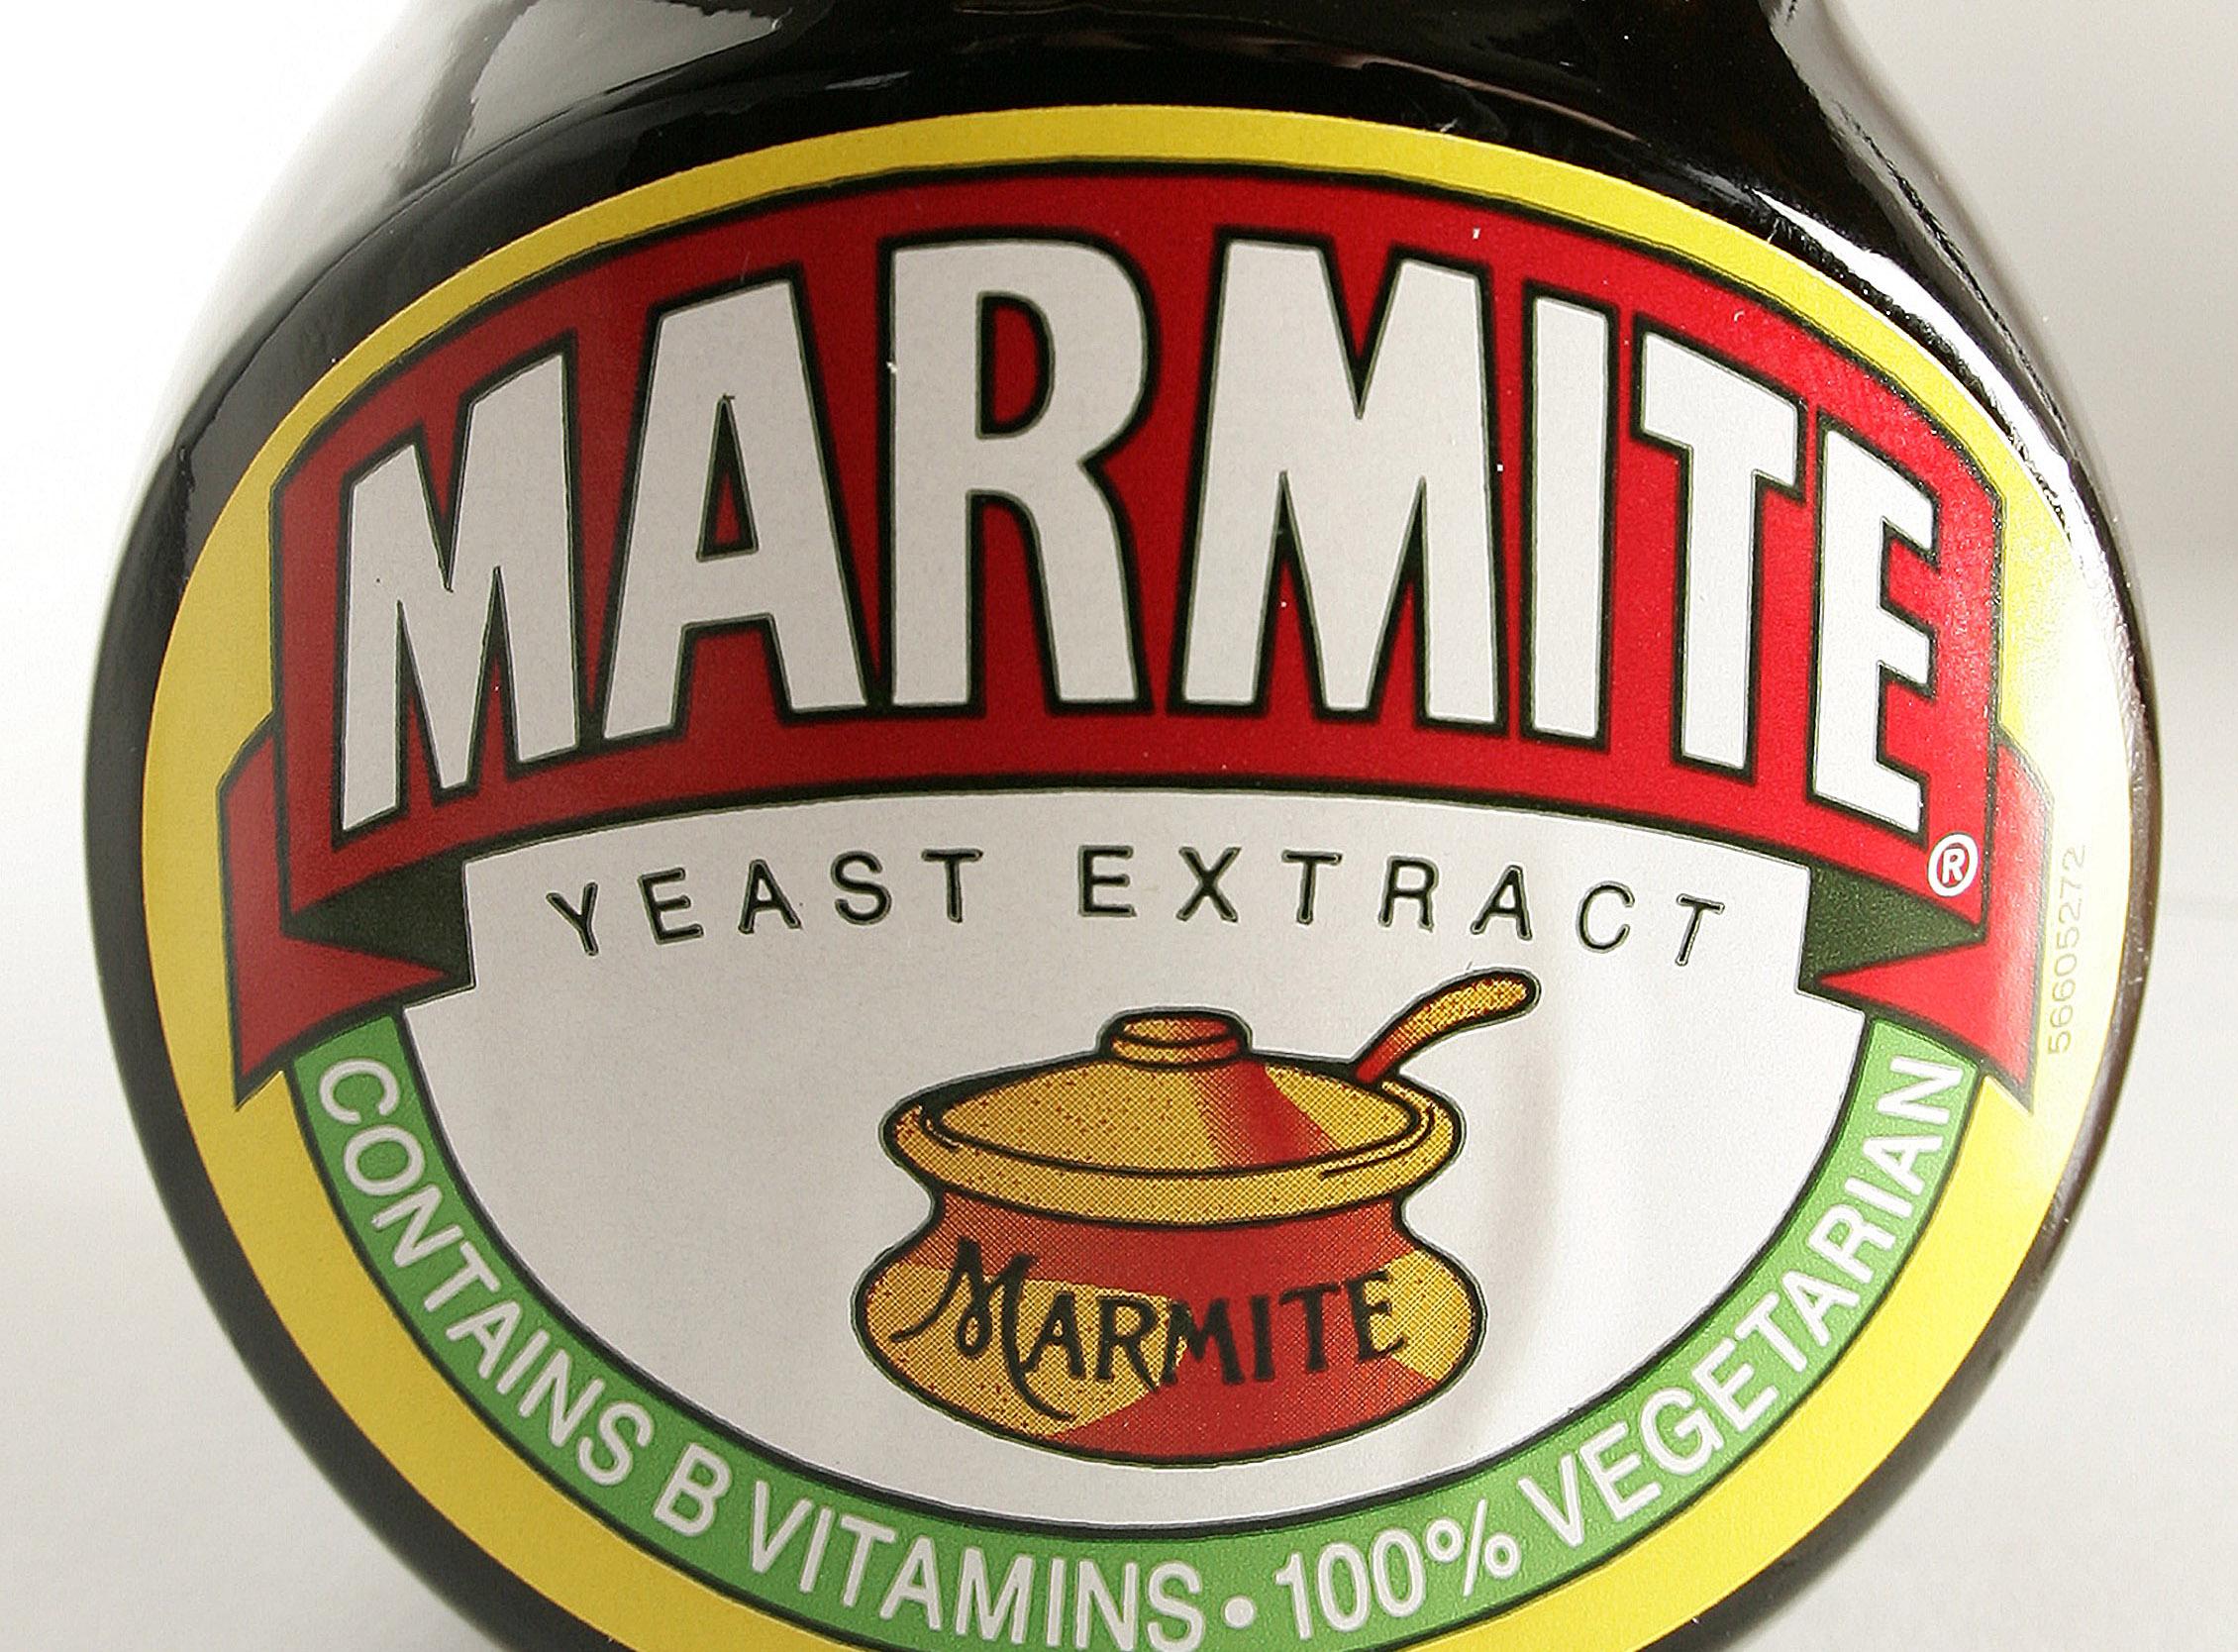 Marmite owner, Unilever, raised the price of the product after the Brexit vote